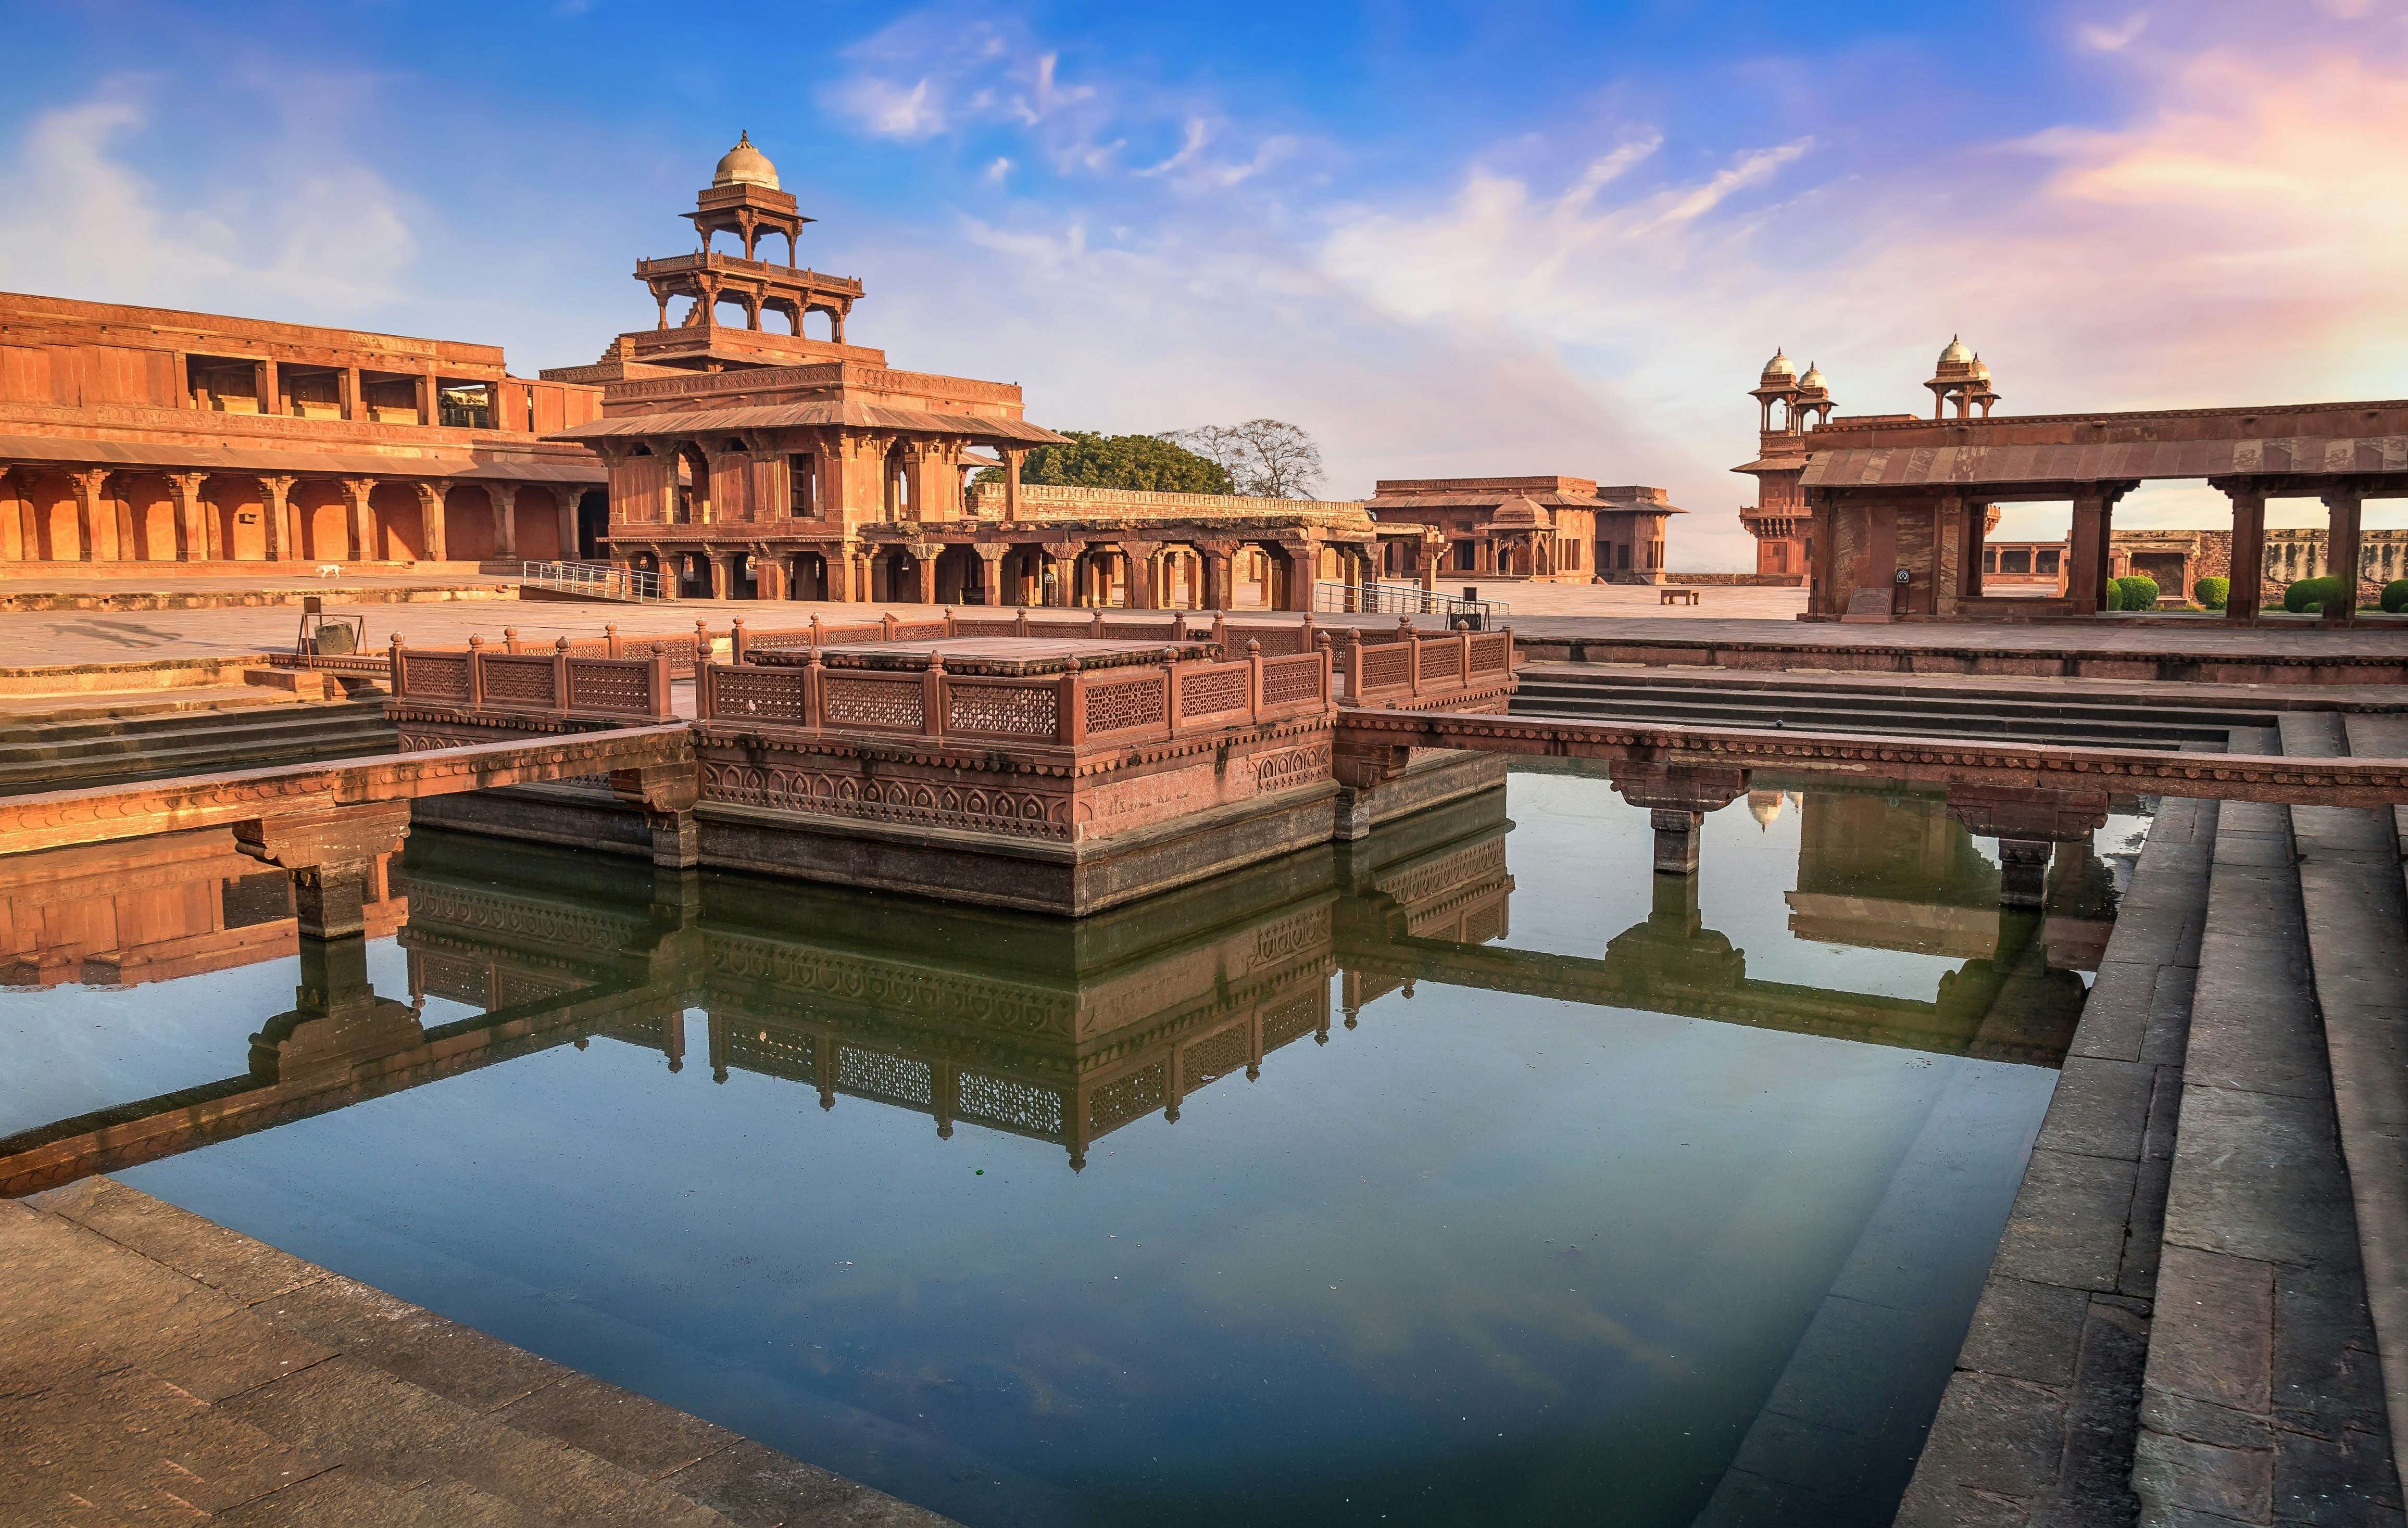 A view of the centre of Fatehpur Sikri, an abandonded Mughal city. The grand sandstone structures are surrounded by a small moat. 